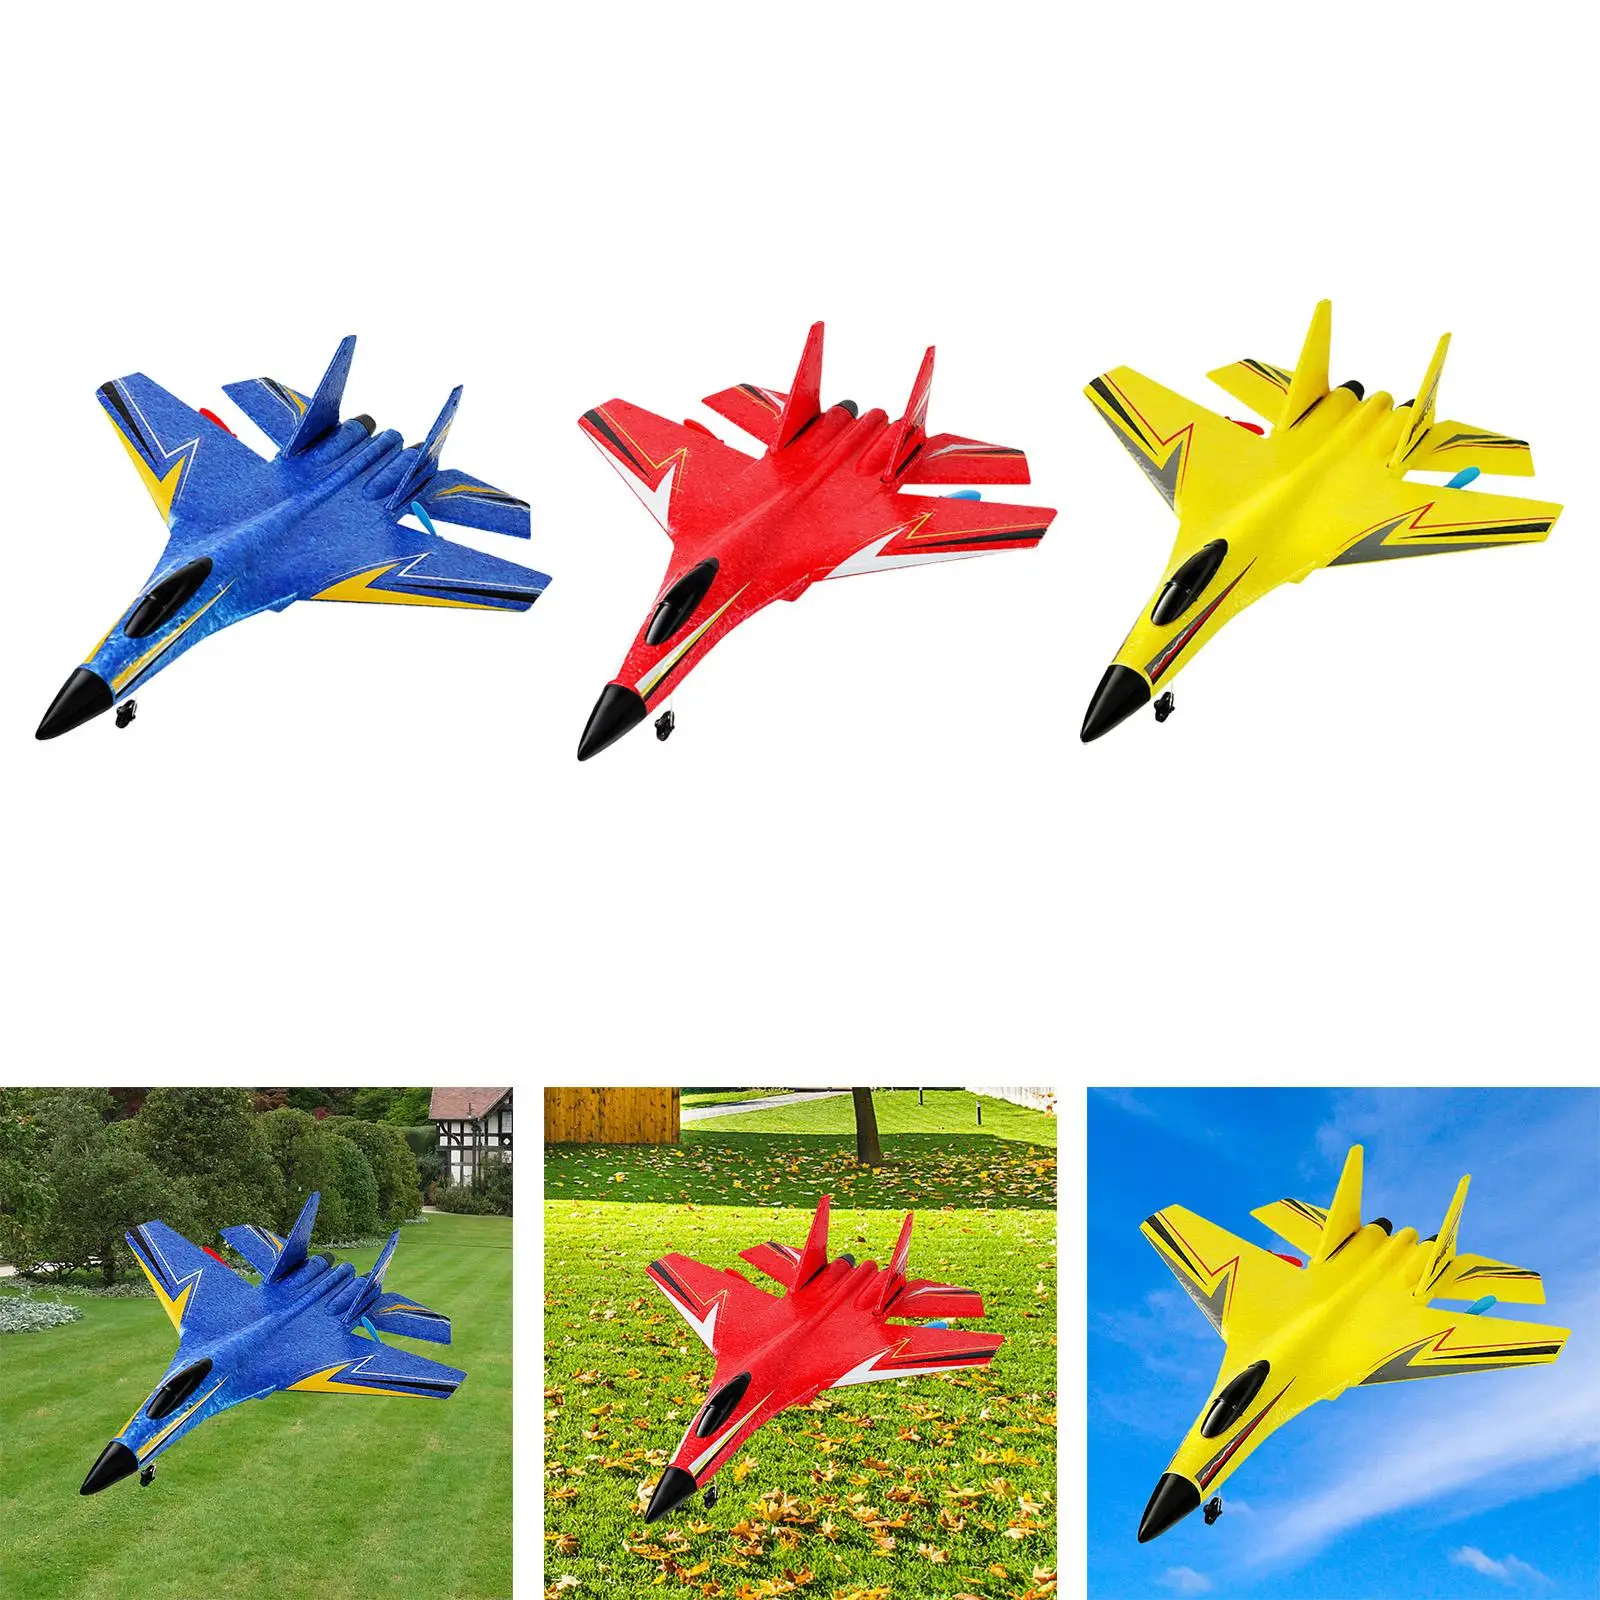 2.4G 2 Channel Remote Control Plane Fighter Glider RC Fixed Wing Plane for Children Kids Beginners Boys Girls Adults